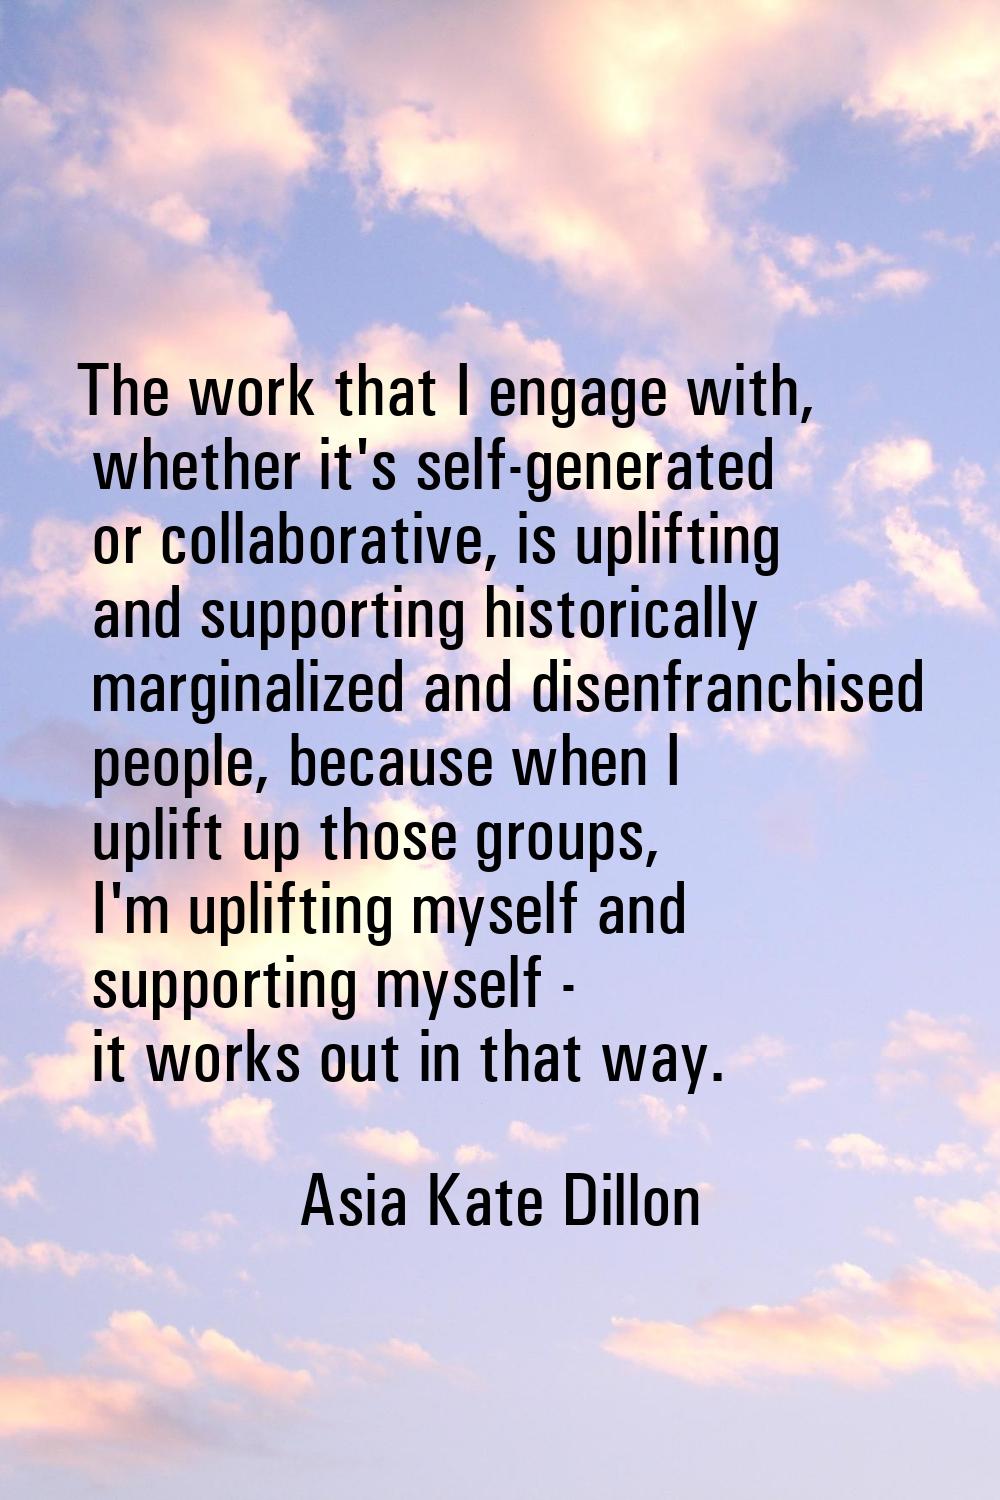 The work that I engage with, whether it's self-generated or collaborative, is uplifting and support